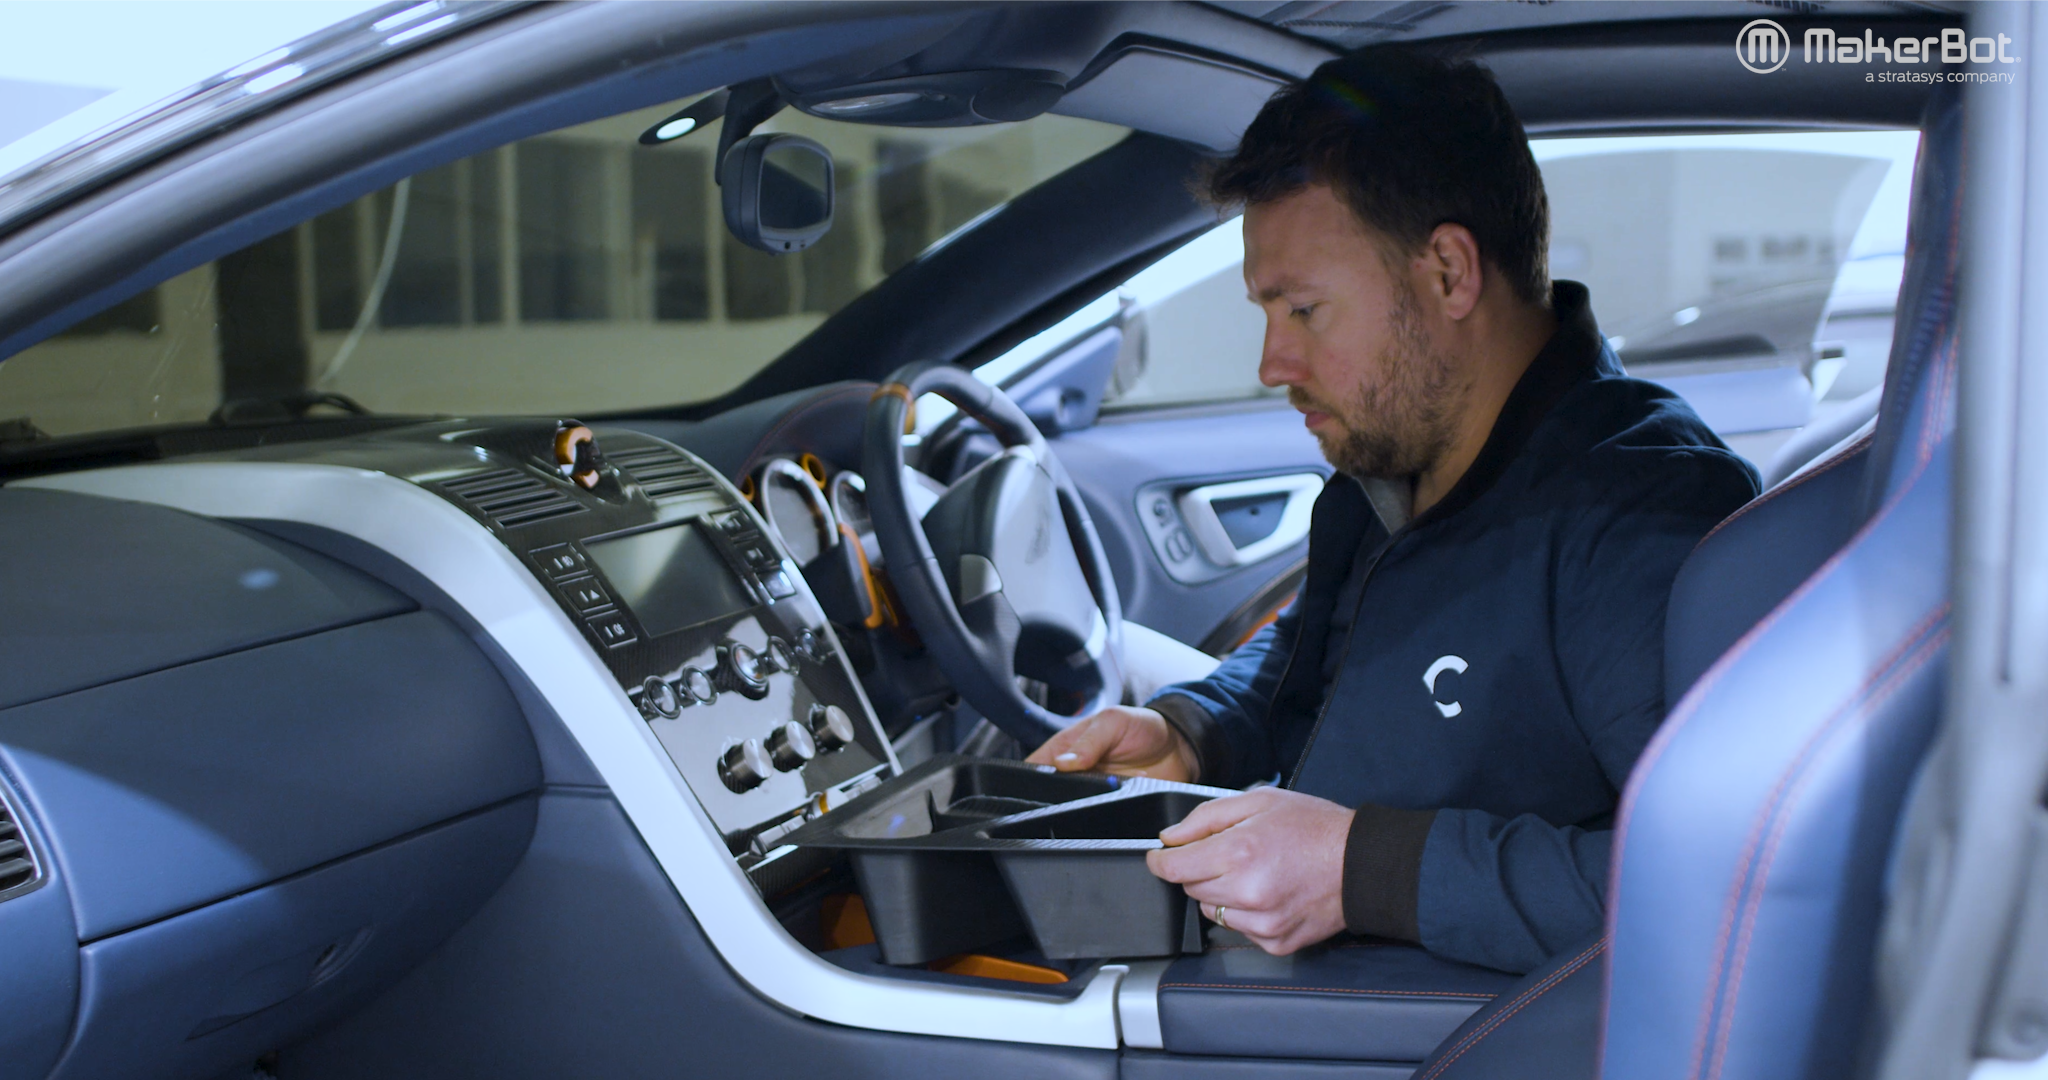 The dimensional accuracy offered by the METHOD X was critical in CALLUM being able to achieve the mounting devices used to position and secure the infotainment screen in the dash.